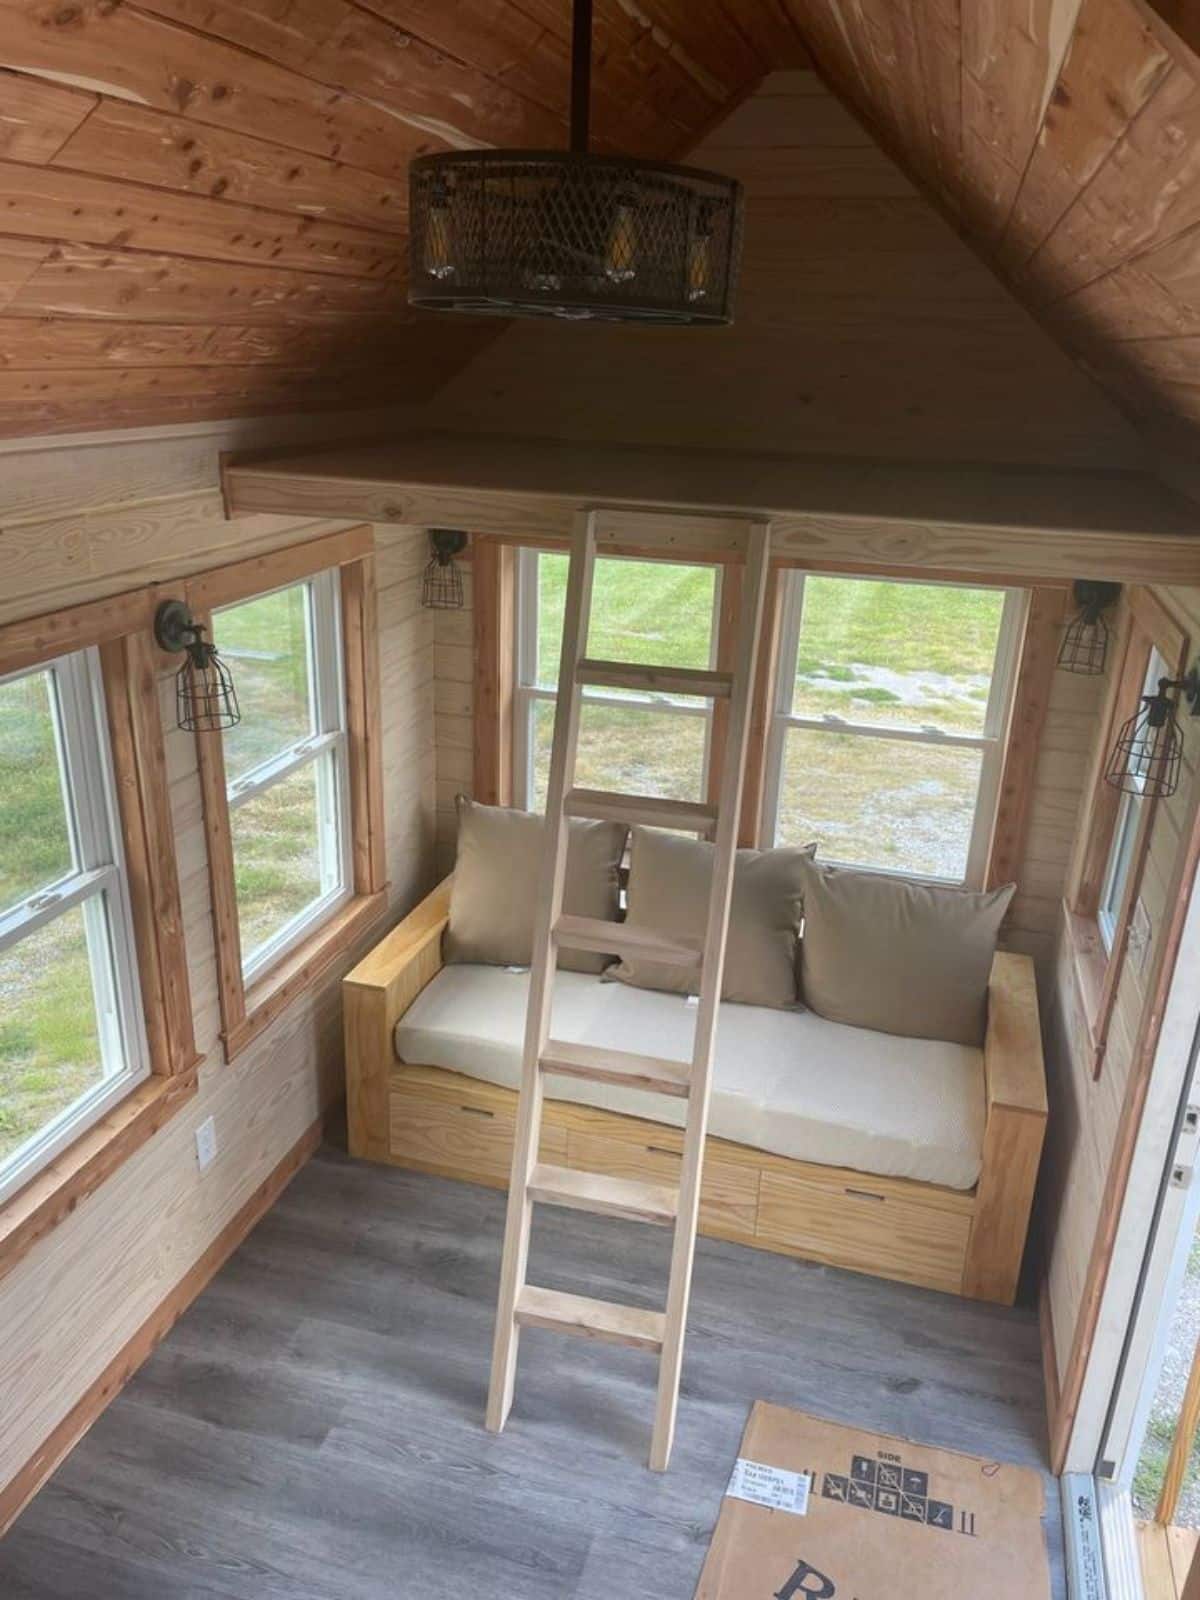 Ladder leading to the other loft space of 326 sf Spacious Tiny House